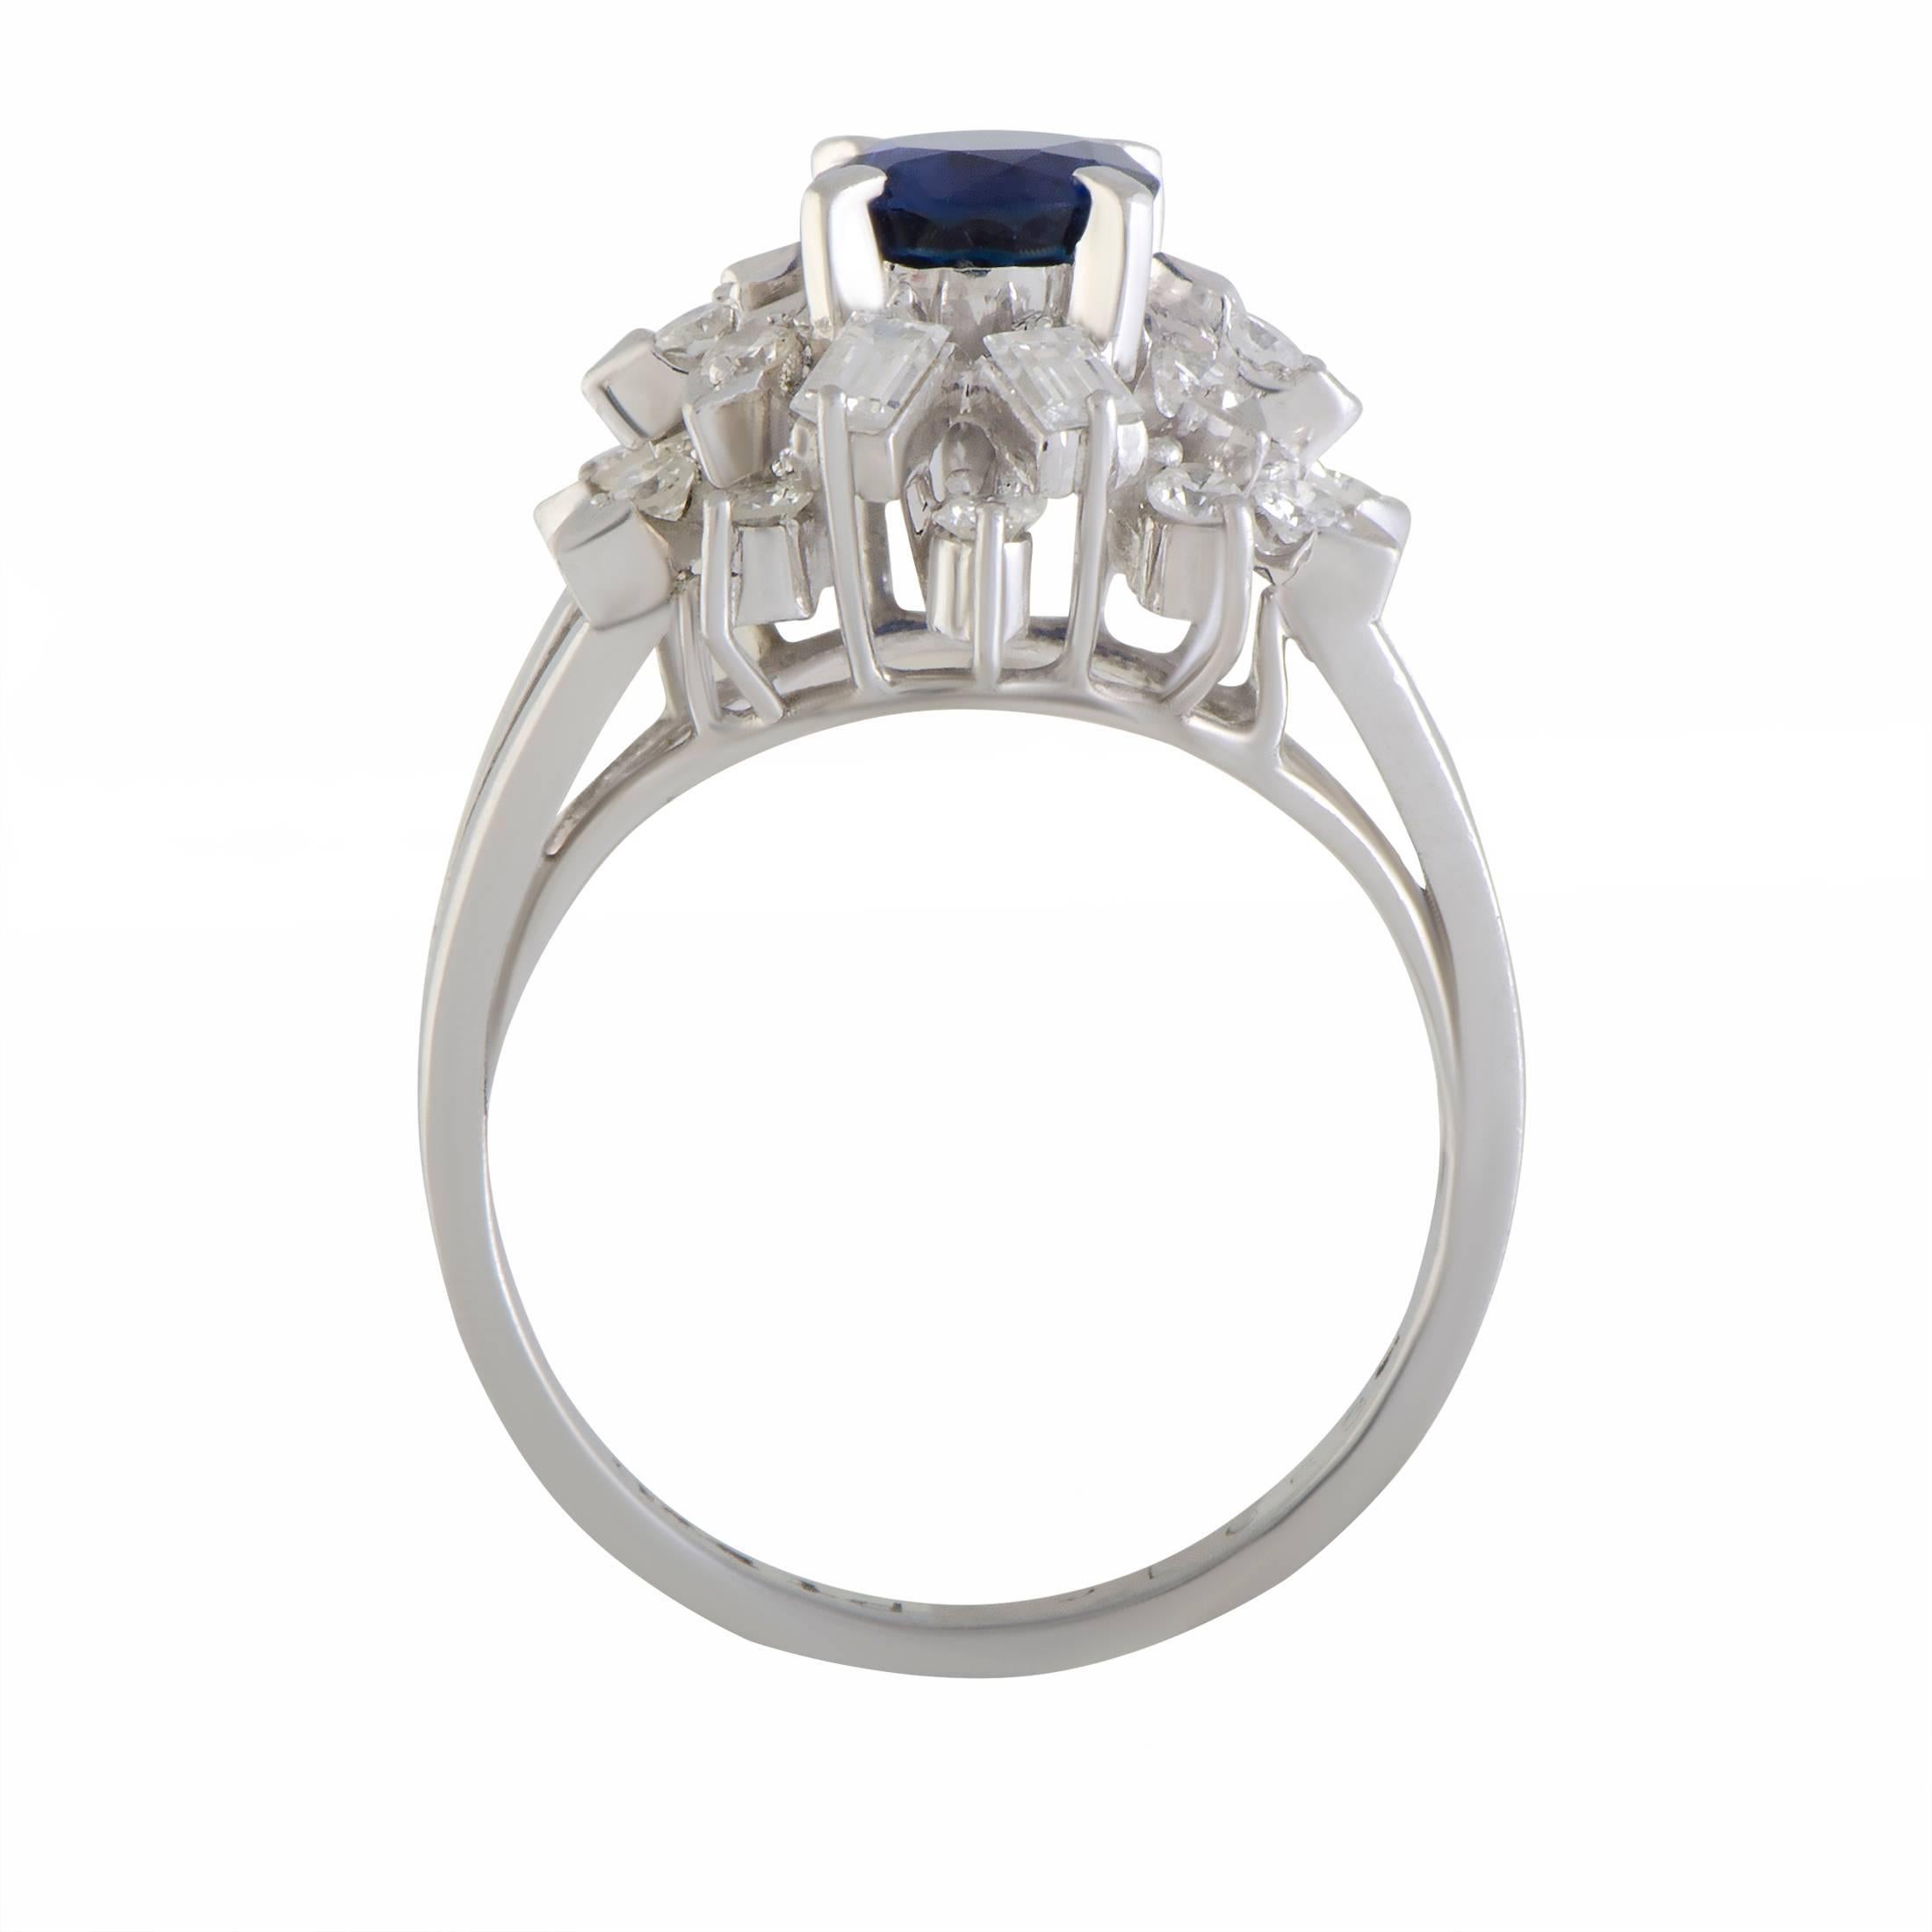 A look of absolute refinement is achieved in this sublime ring by combining luxuriously glistening diamonds and a regal sapphire and complementing them with prestigious platinum. The sapphire weighs 0.97 carats and the diamonds total 0.53